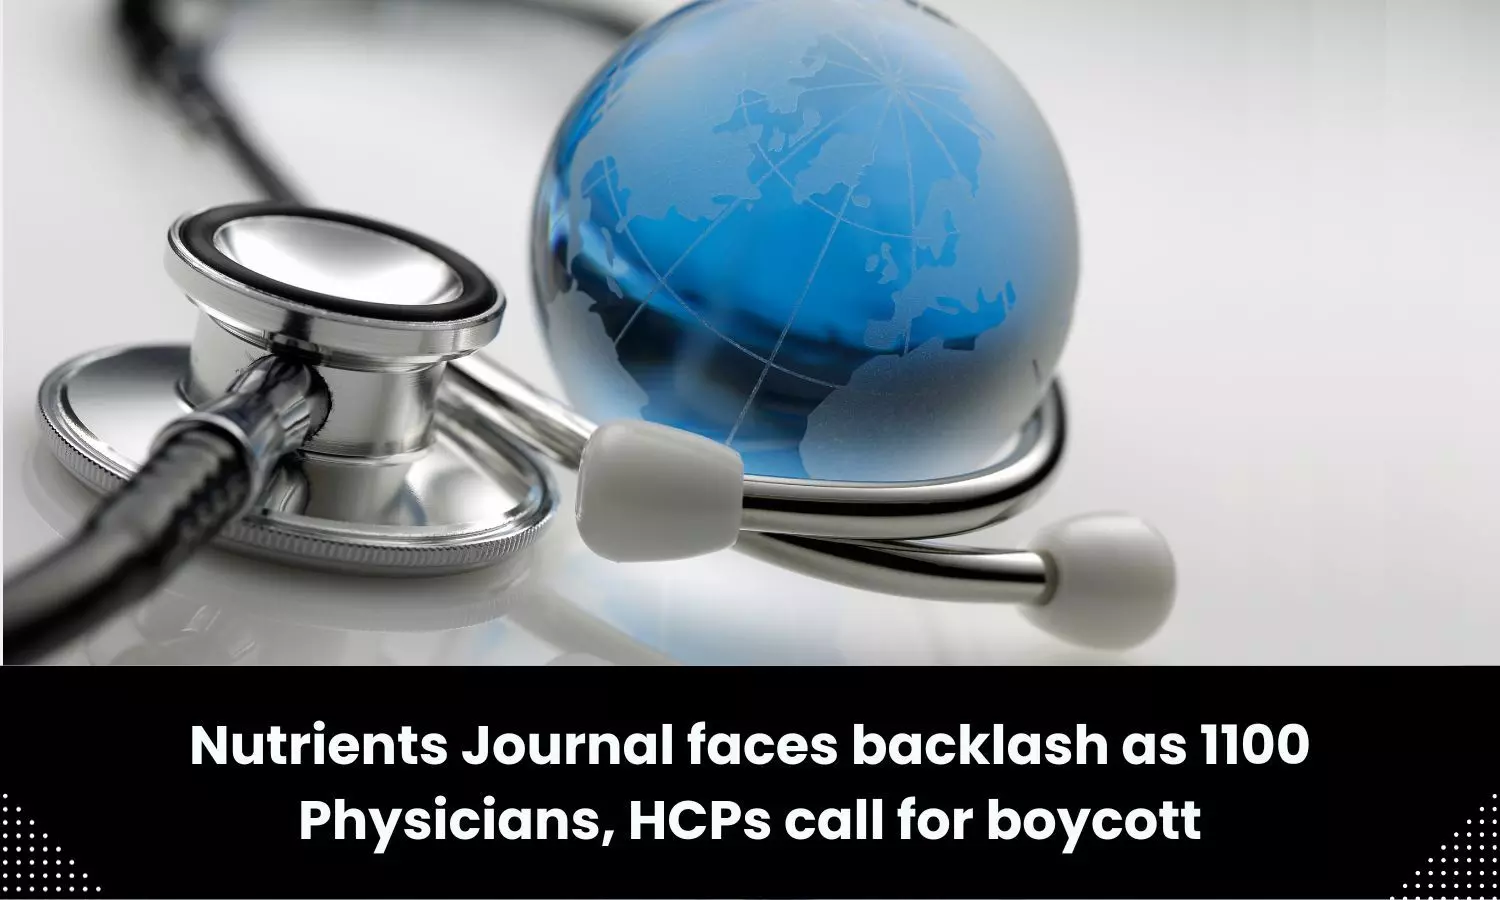 Over 1100 experts decide to boycott medical journal Nutrients, its publisher MDPI